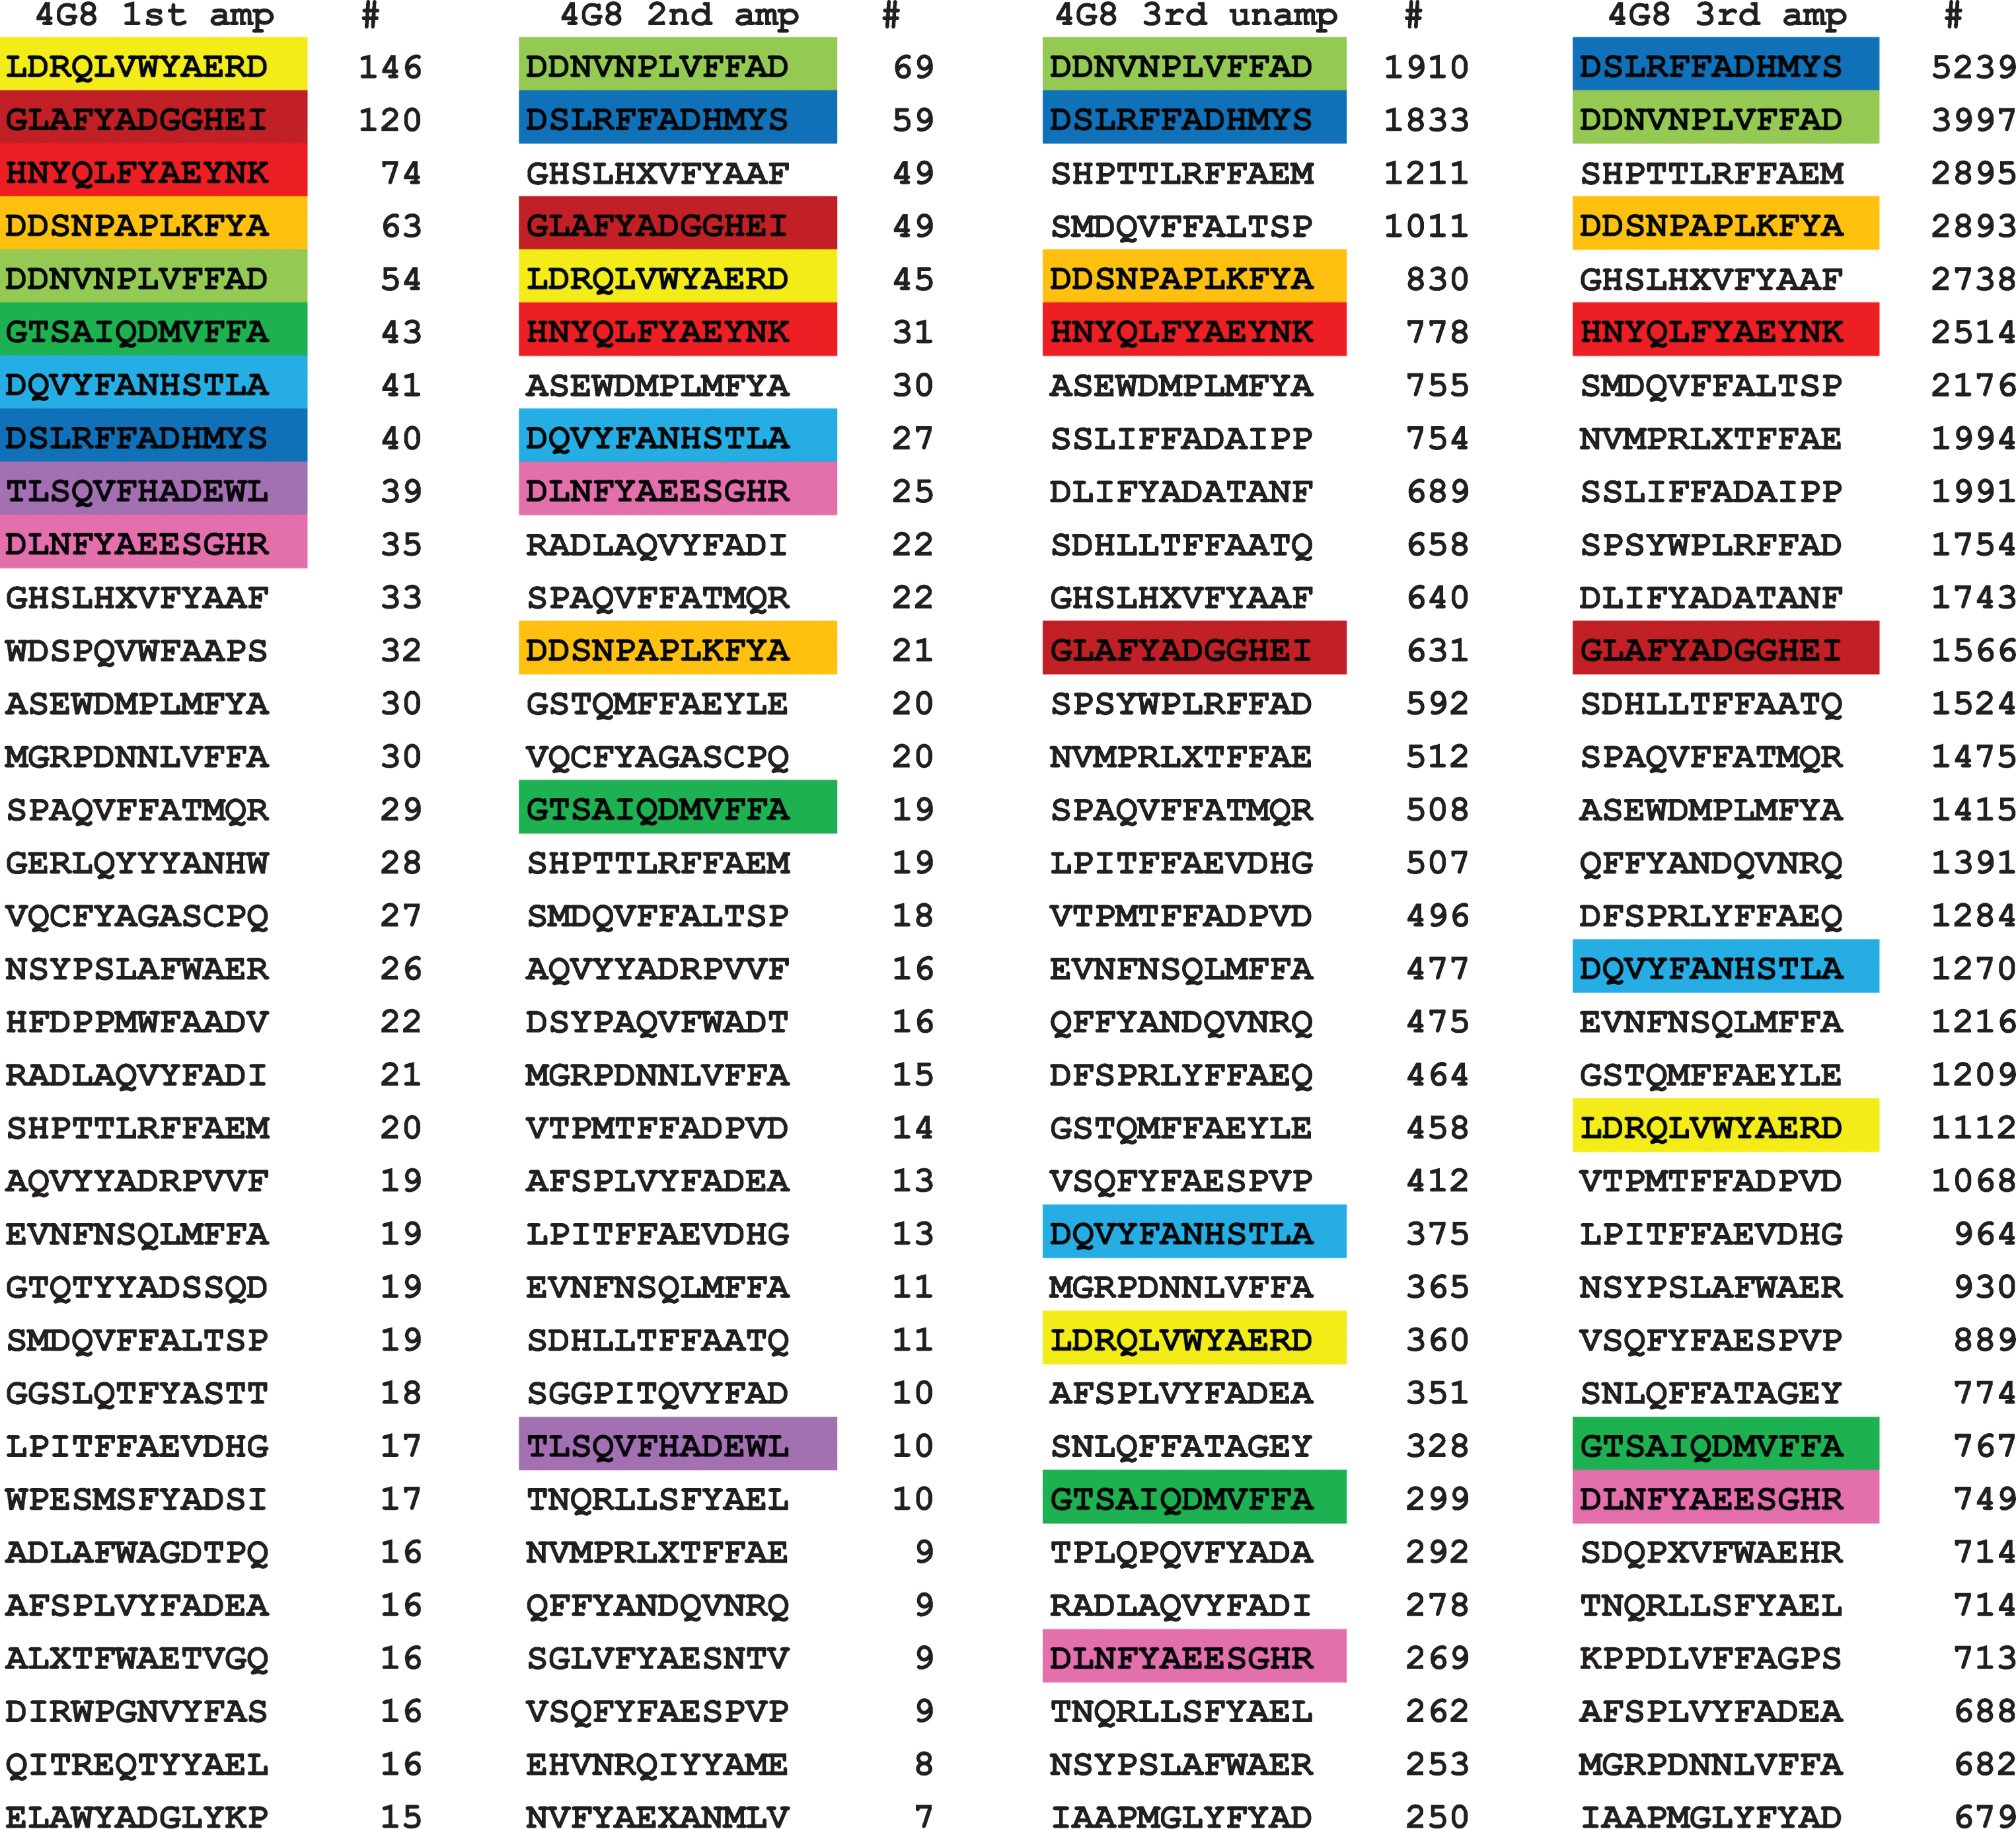 Top ranked 32 unique sequences for 4G8. The top 10 sequences in the first panning are color coded to make their recognition more readily apparent. Of the top 10 sequences in the first panning, all ten are found in the top 32 of the second panning and 9 out of 10 are found in the third round of panning, indicating that their relative abundance does not change much with subsequent pannings.